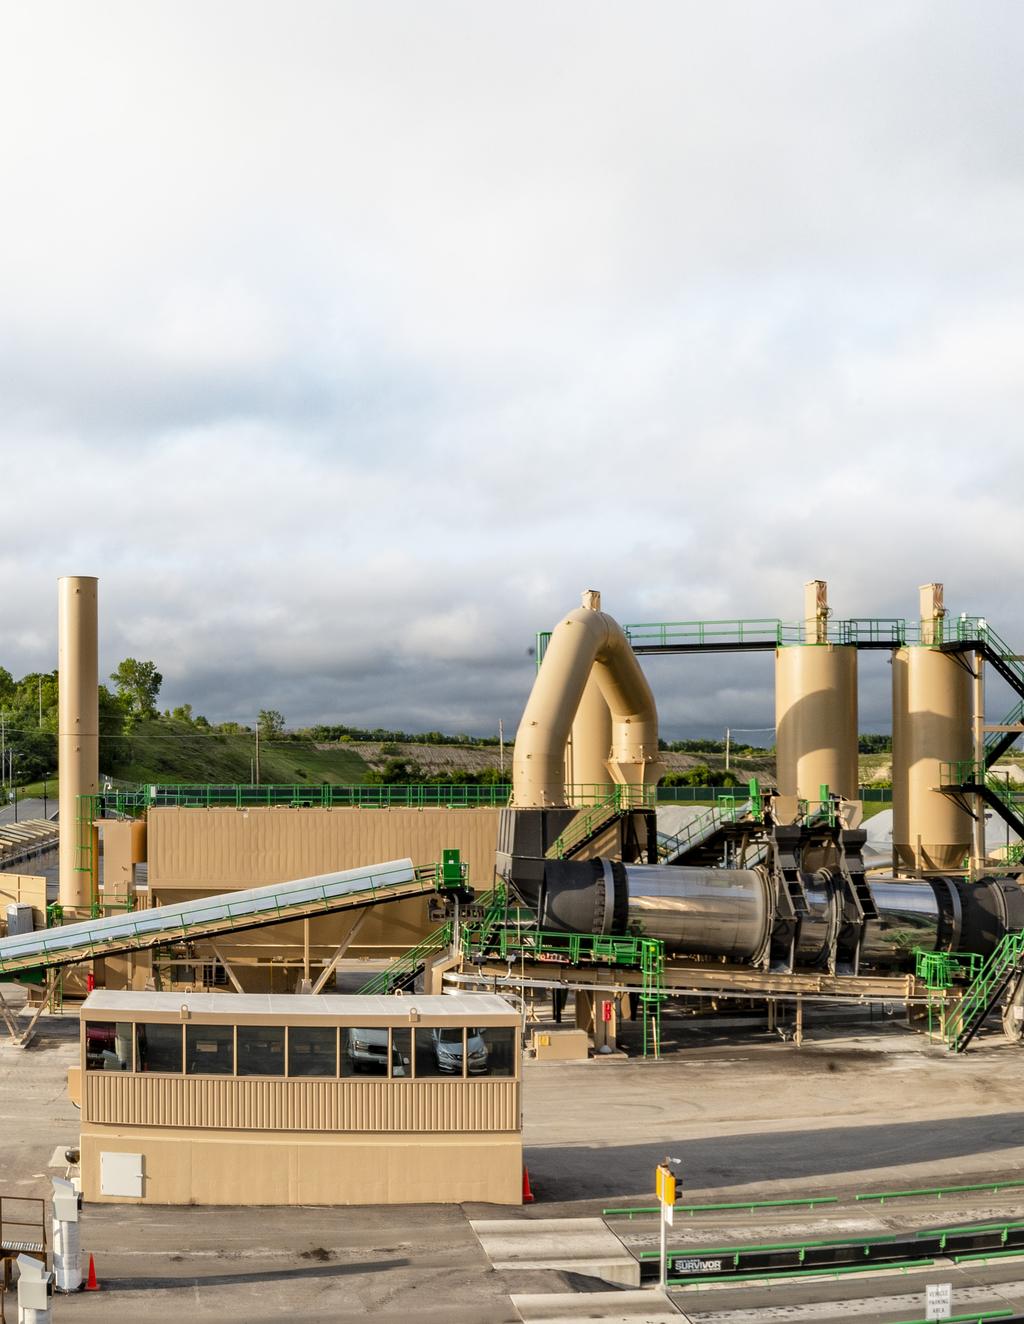 ASTEC D I L L MAN A SP H ALT S ILO S YS TEM FOR ASPHALT MIXING PLANTS Maximize production capabilities with an advanced silo system from Dillman.